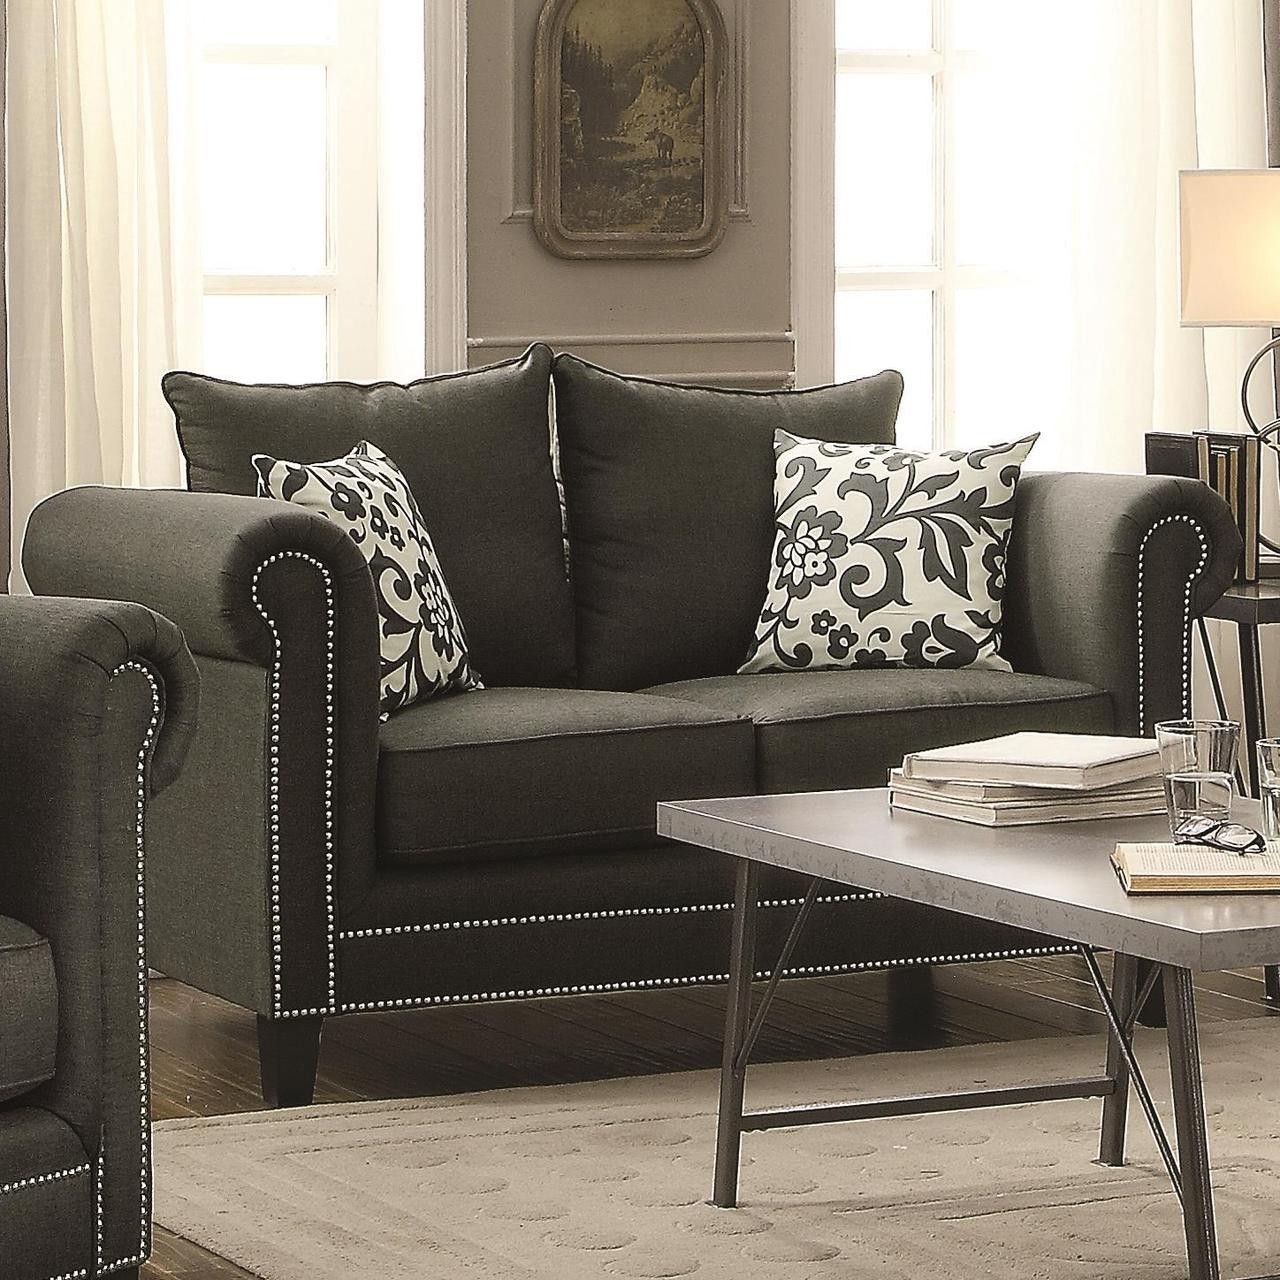 Light Charcoal Linen Sofas Throughout Well Known Beatrice Charcoal Linen Sofa And Loveseat – Cb Furniture (View 4 of 15)